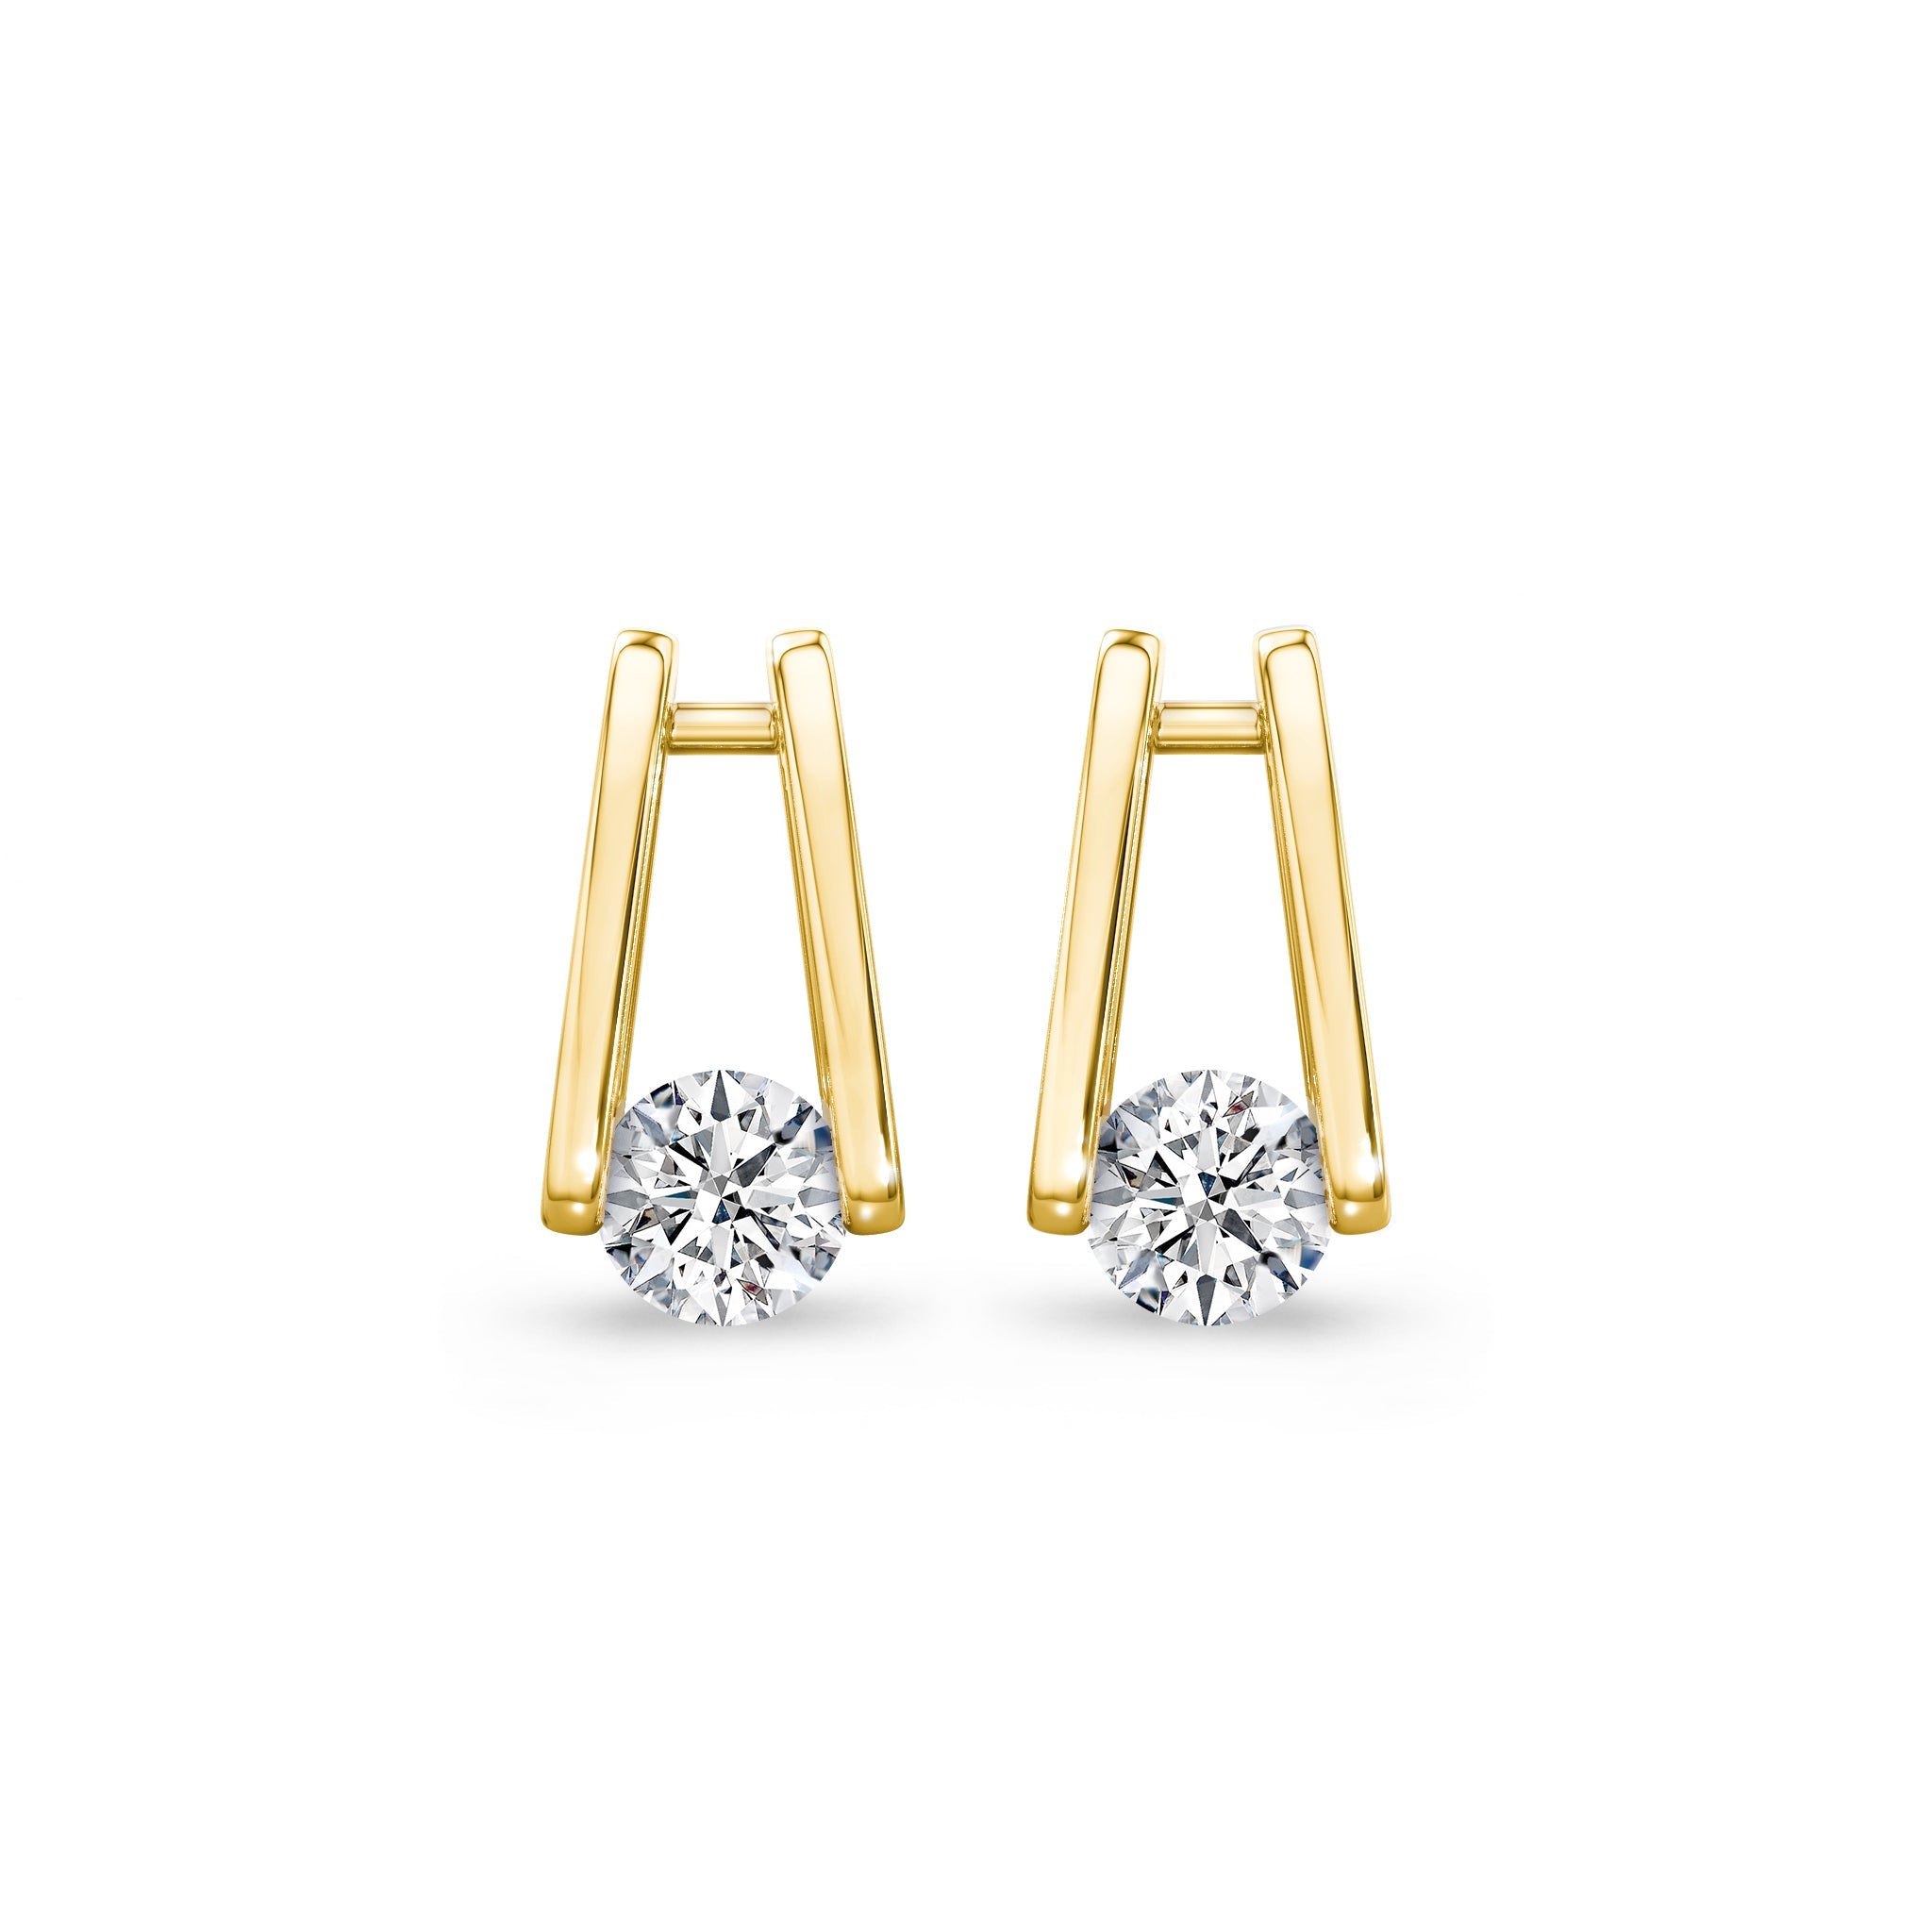 Millennium Classic Diamond Earrings 1.00 Carat in 18K Yellow Gold Front View